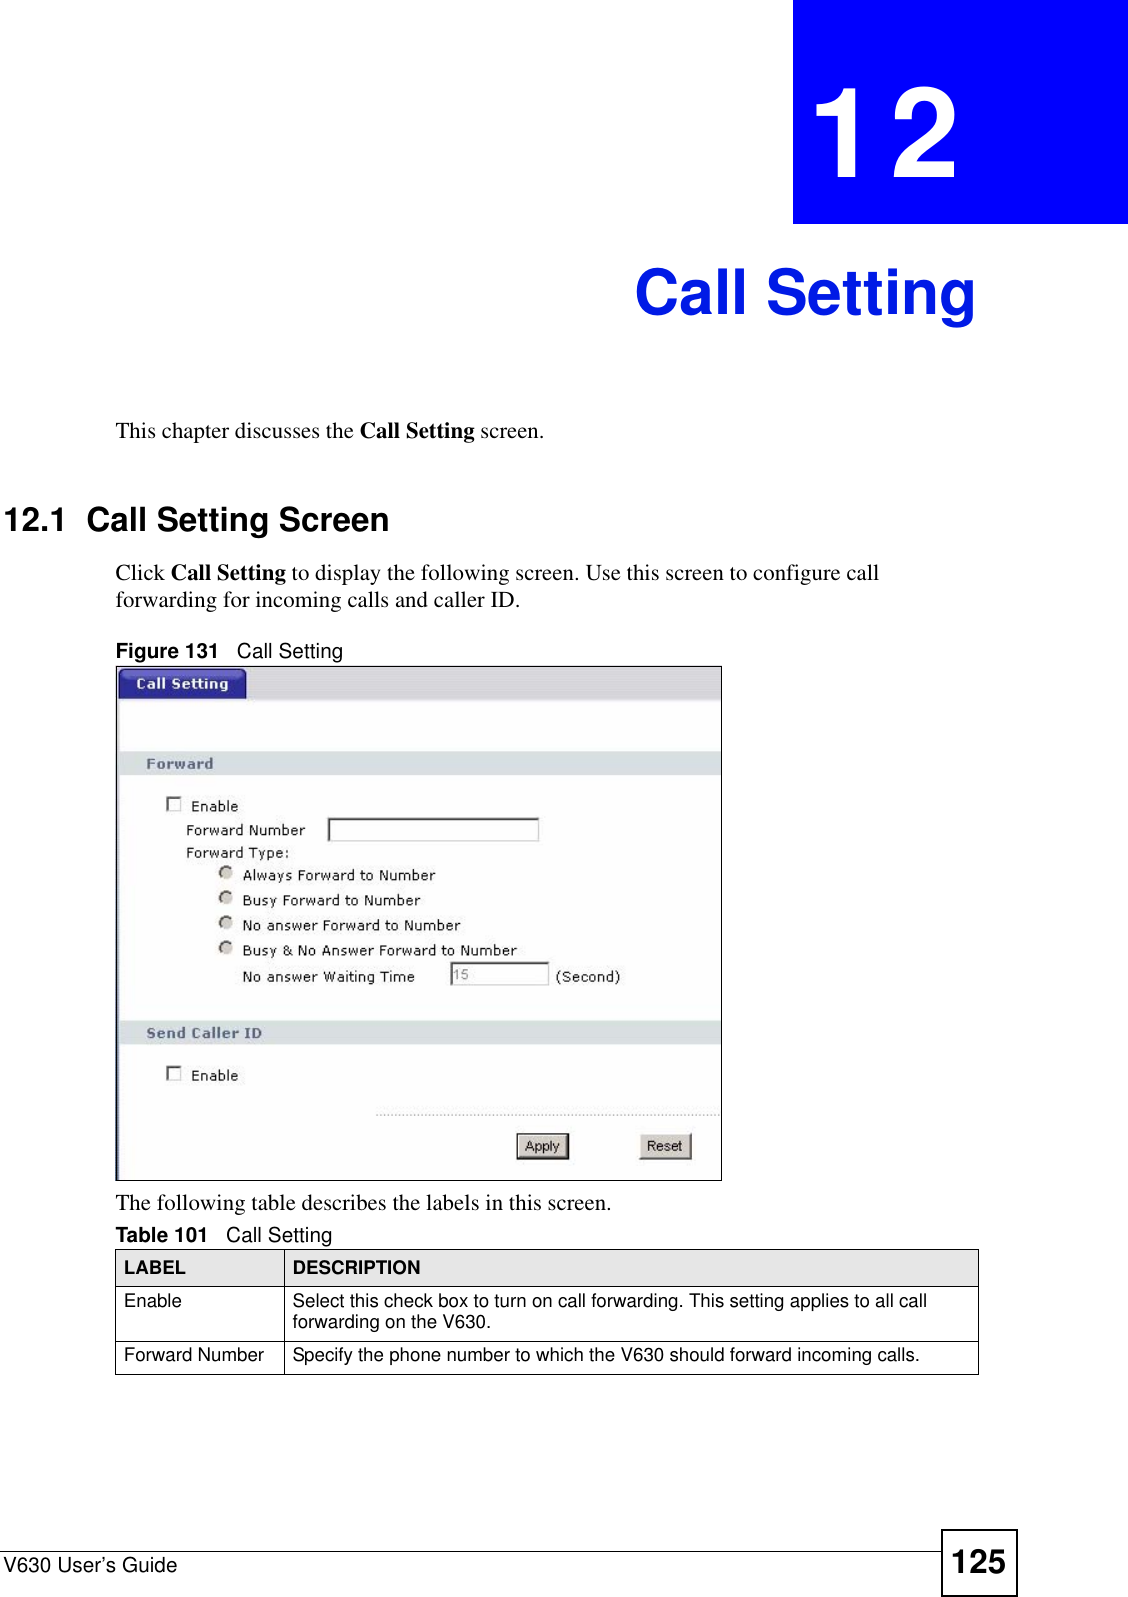 V630 User’s Guide 125CHAPTER  12 Call SettingThis chapter discusses the Call Setting screen.12.1  Call Setting ScreenClick Call Setting to display the following screen. Use this screen to configure call forwarding for incoming calls and caller ID.Figure 131   Call SettingThe following table describes the labels in this screen.Table 101   Call SettingLABEL DESCRIPTIONEnable Select this check box to turn on call forwarding. This setting applies to all call forwarding on the V630.Forward Number Specify the phone number to which the V630 should forward incoming calls. 